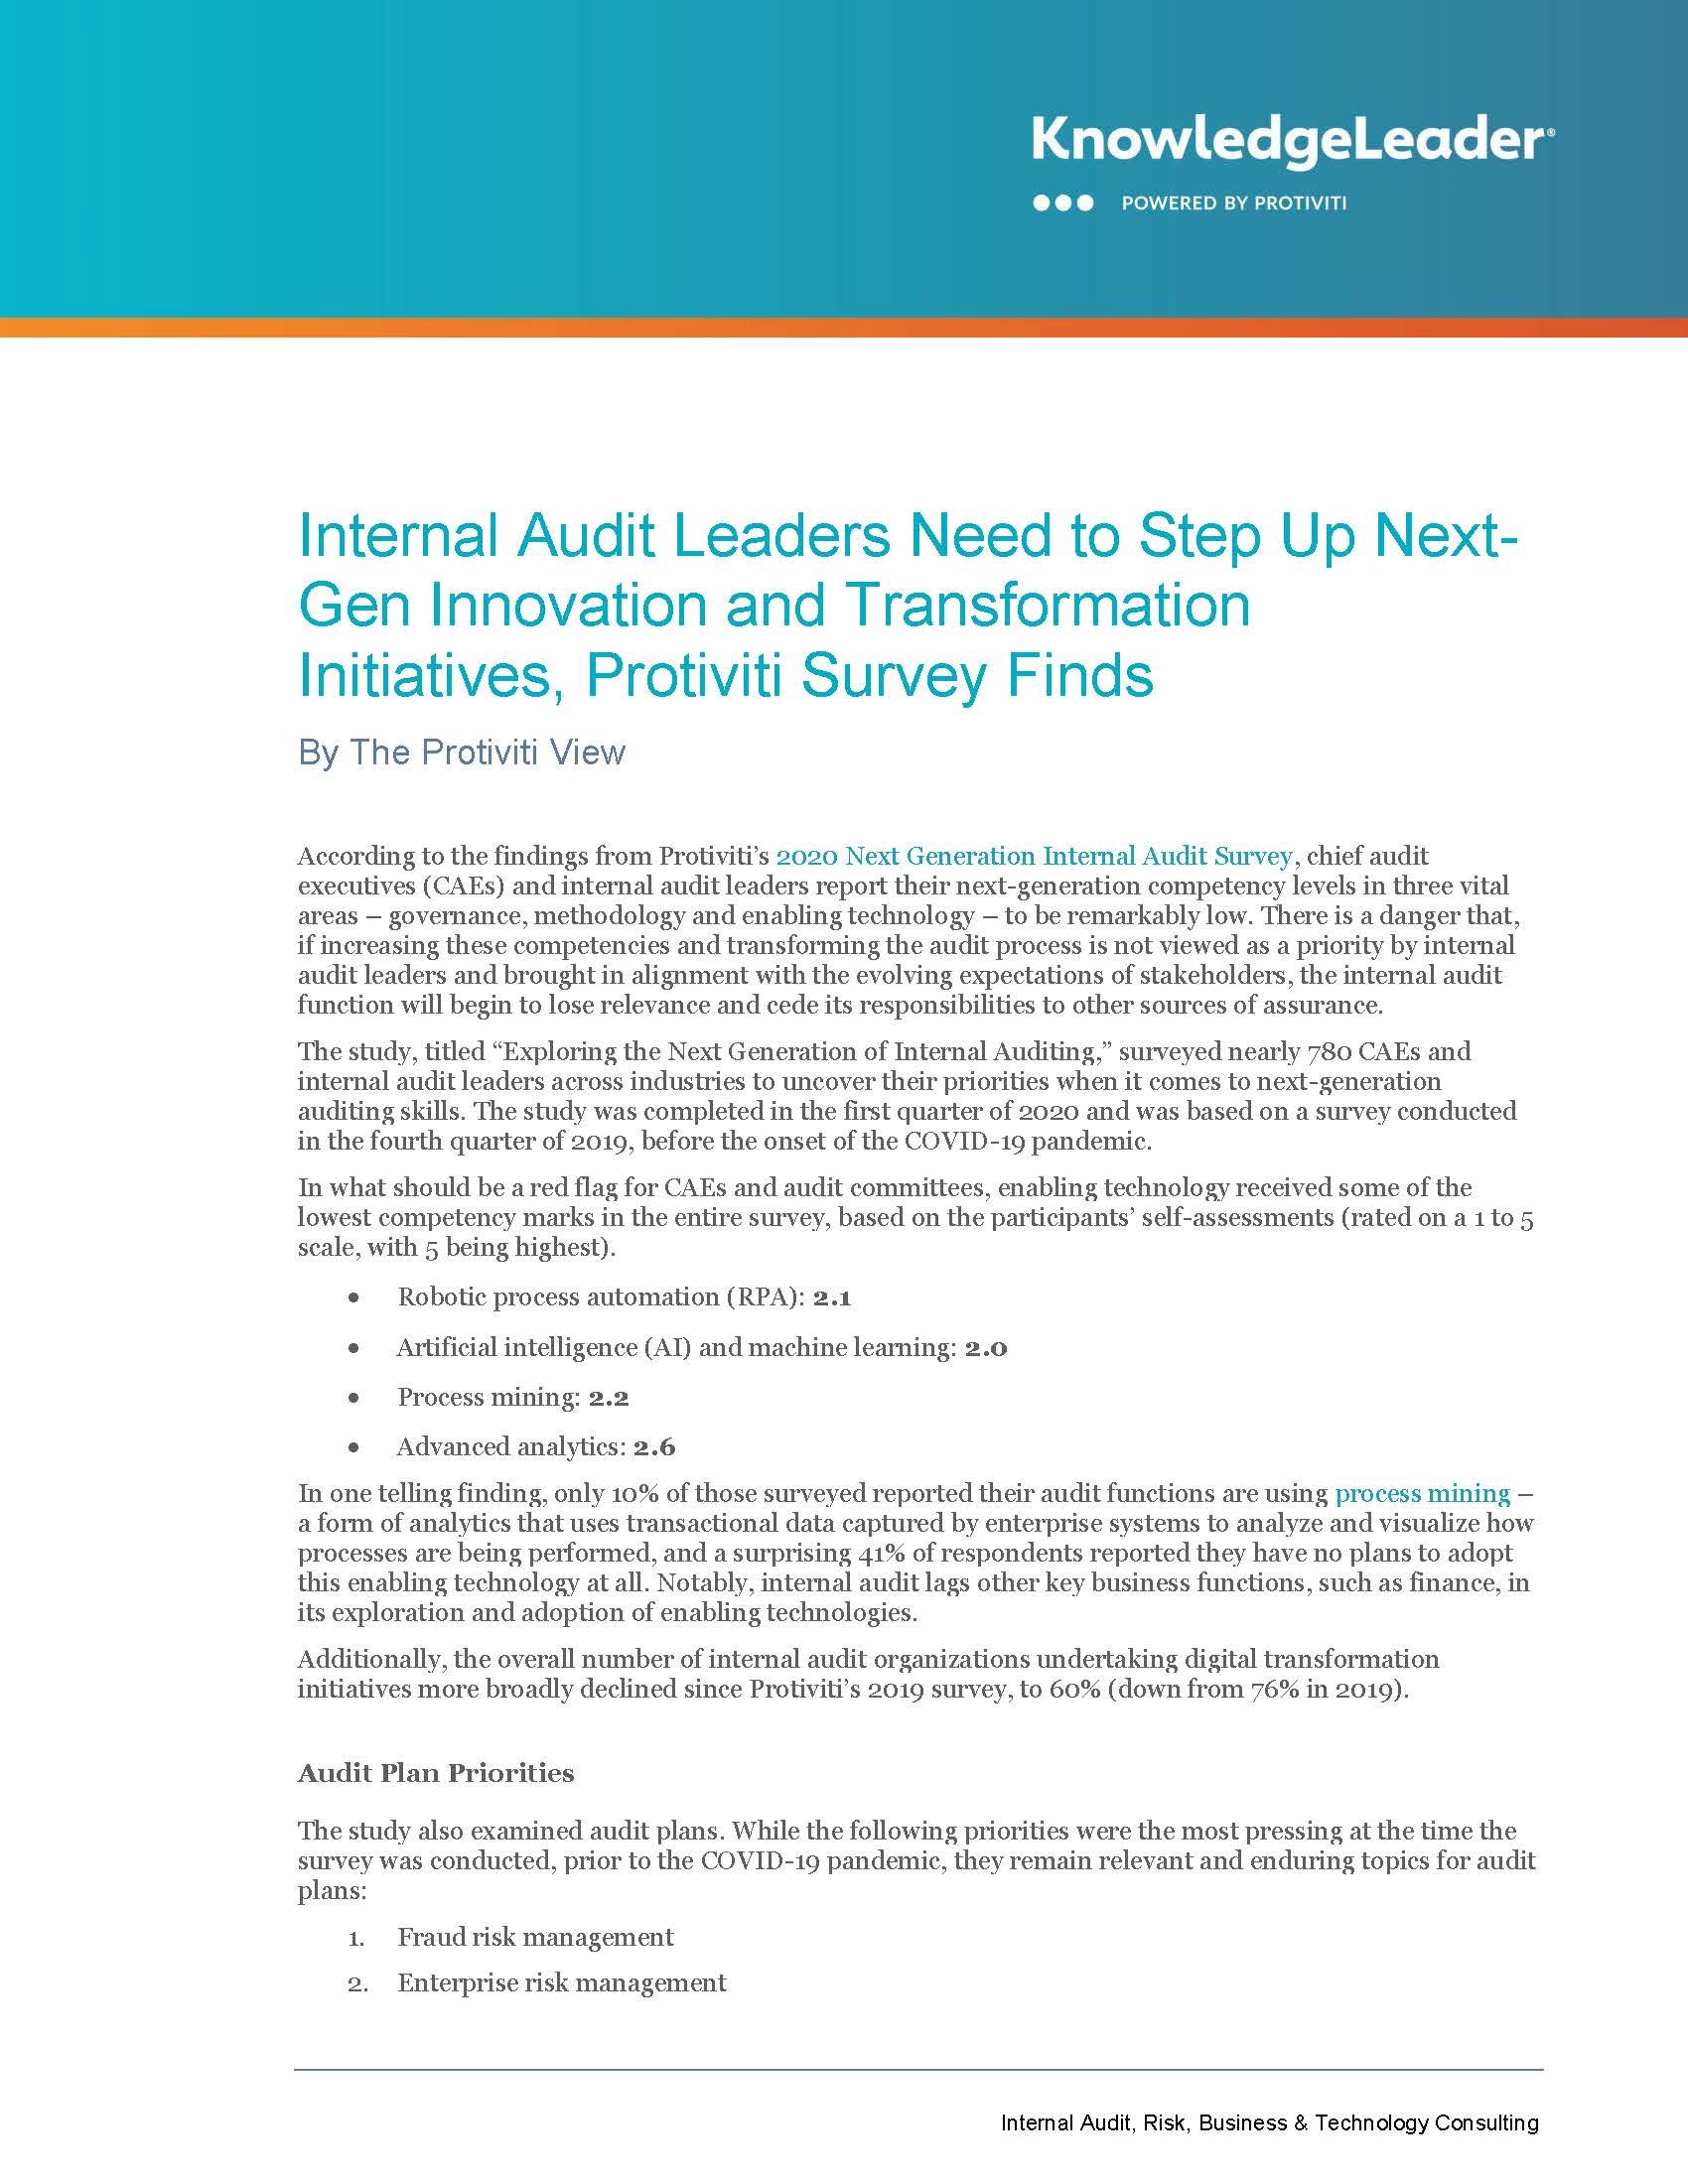 Screenshot of the first page of Internal Audit Leaders Need to Step Up Next-Gen Innovation and Transformation Initiatives, Protiviti Survey Finds